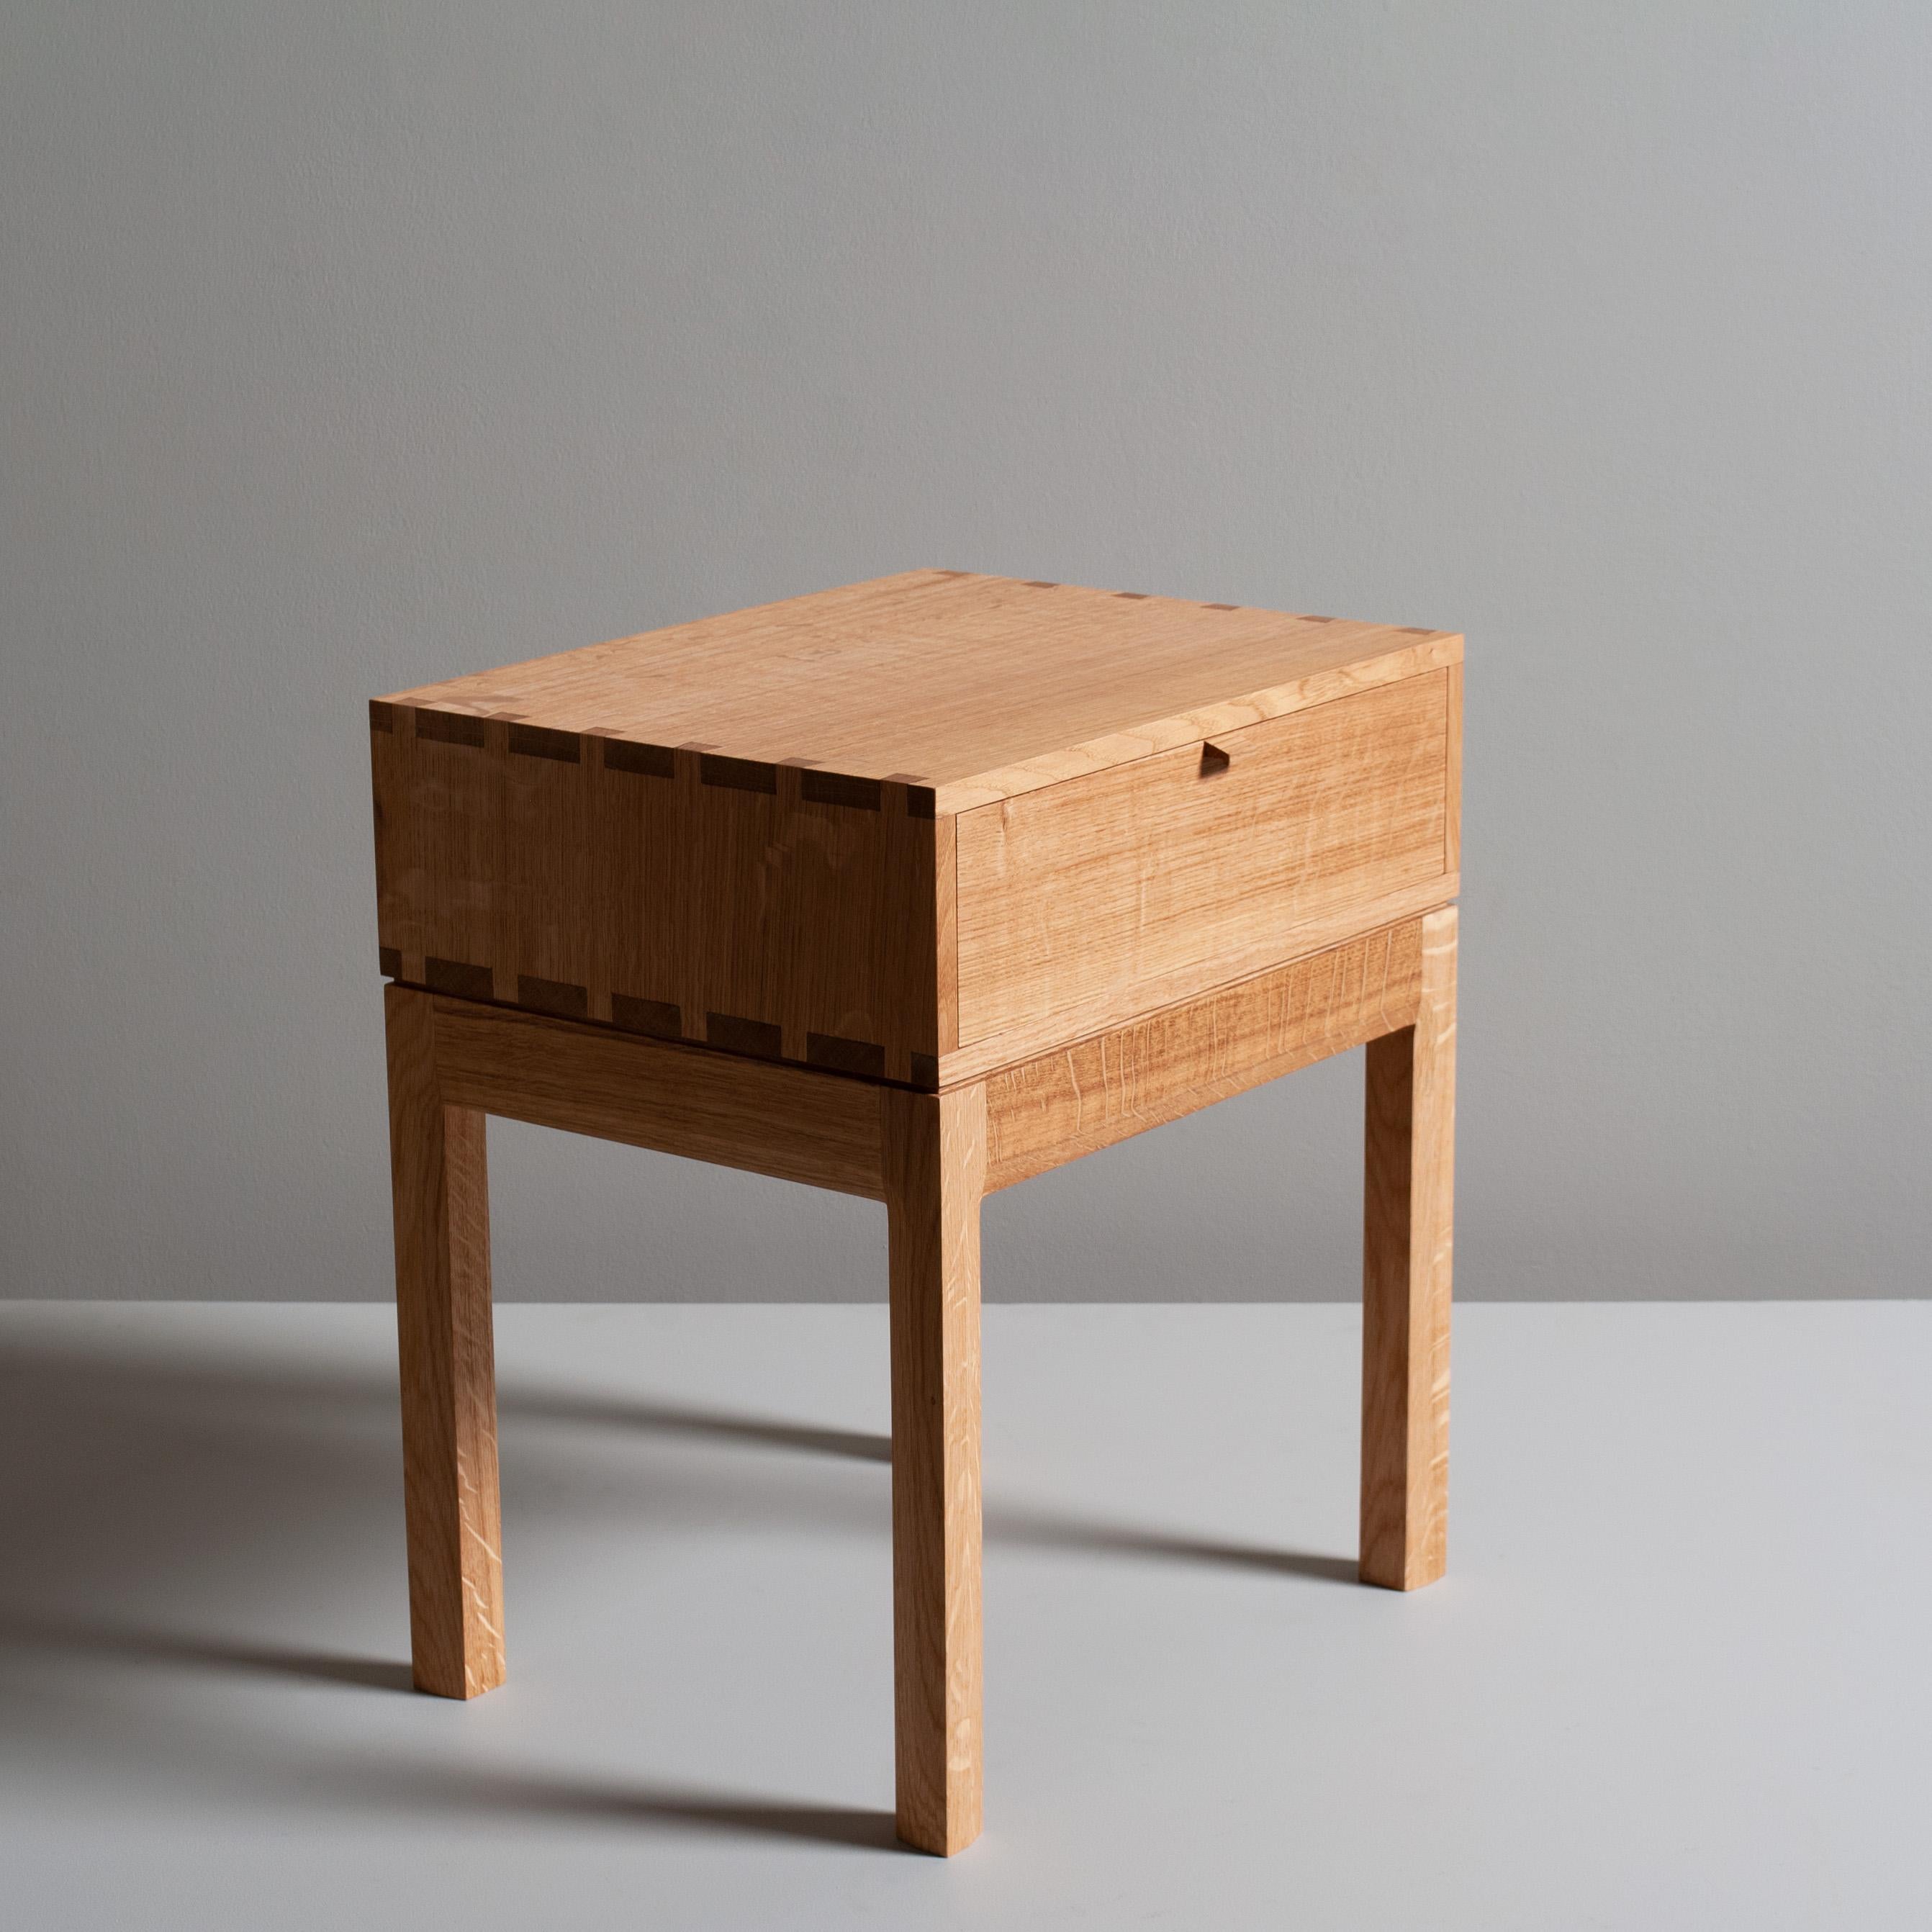 English quarter-sawn oak hand-crafted nightstands in the modernist style. Constructed from finest English oak including all the internal dovetail jointed drawer and carcass. The upper box is detailed with exposed structural hand-cut dovetail